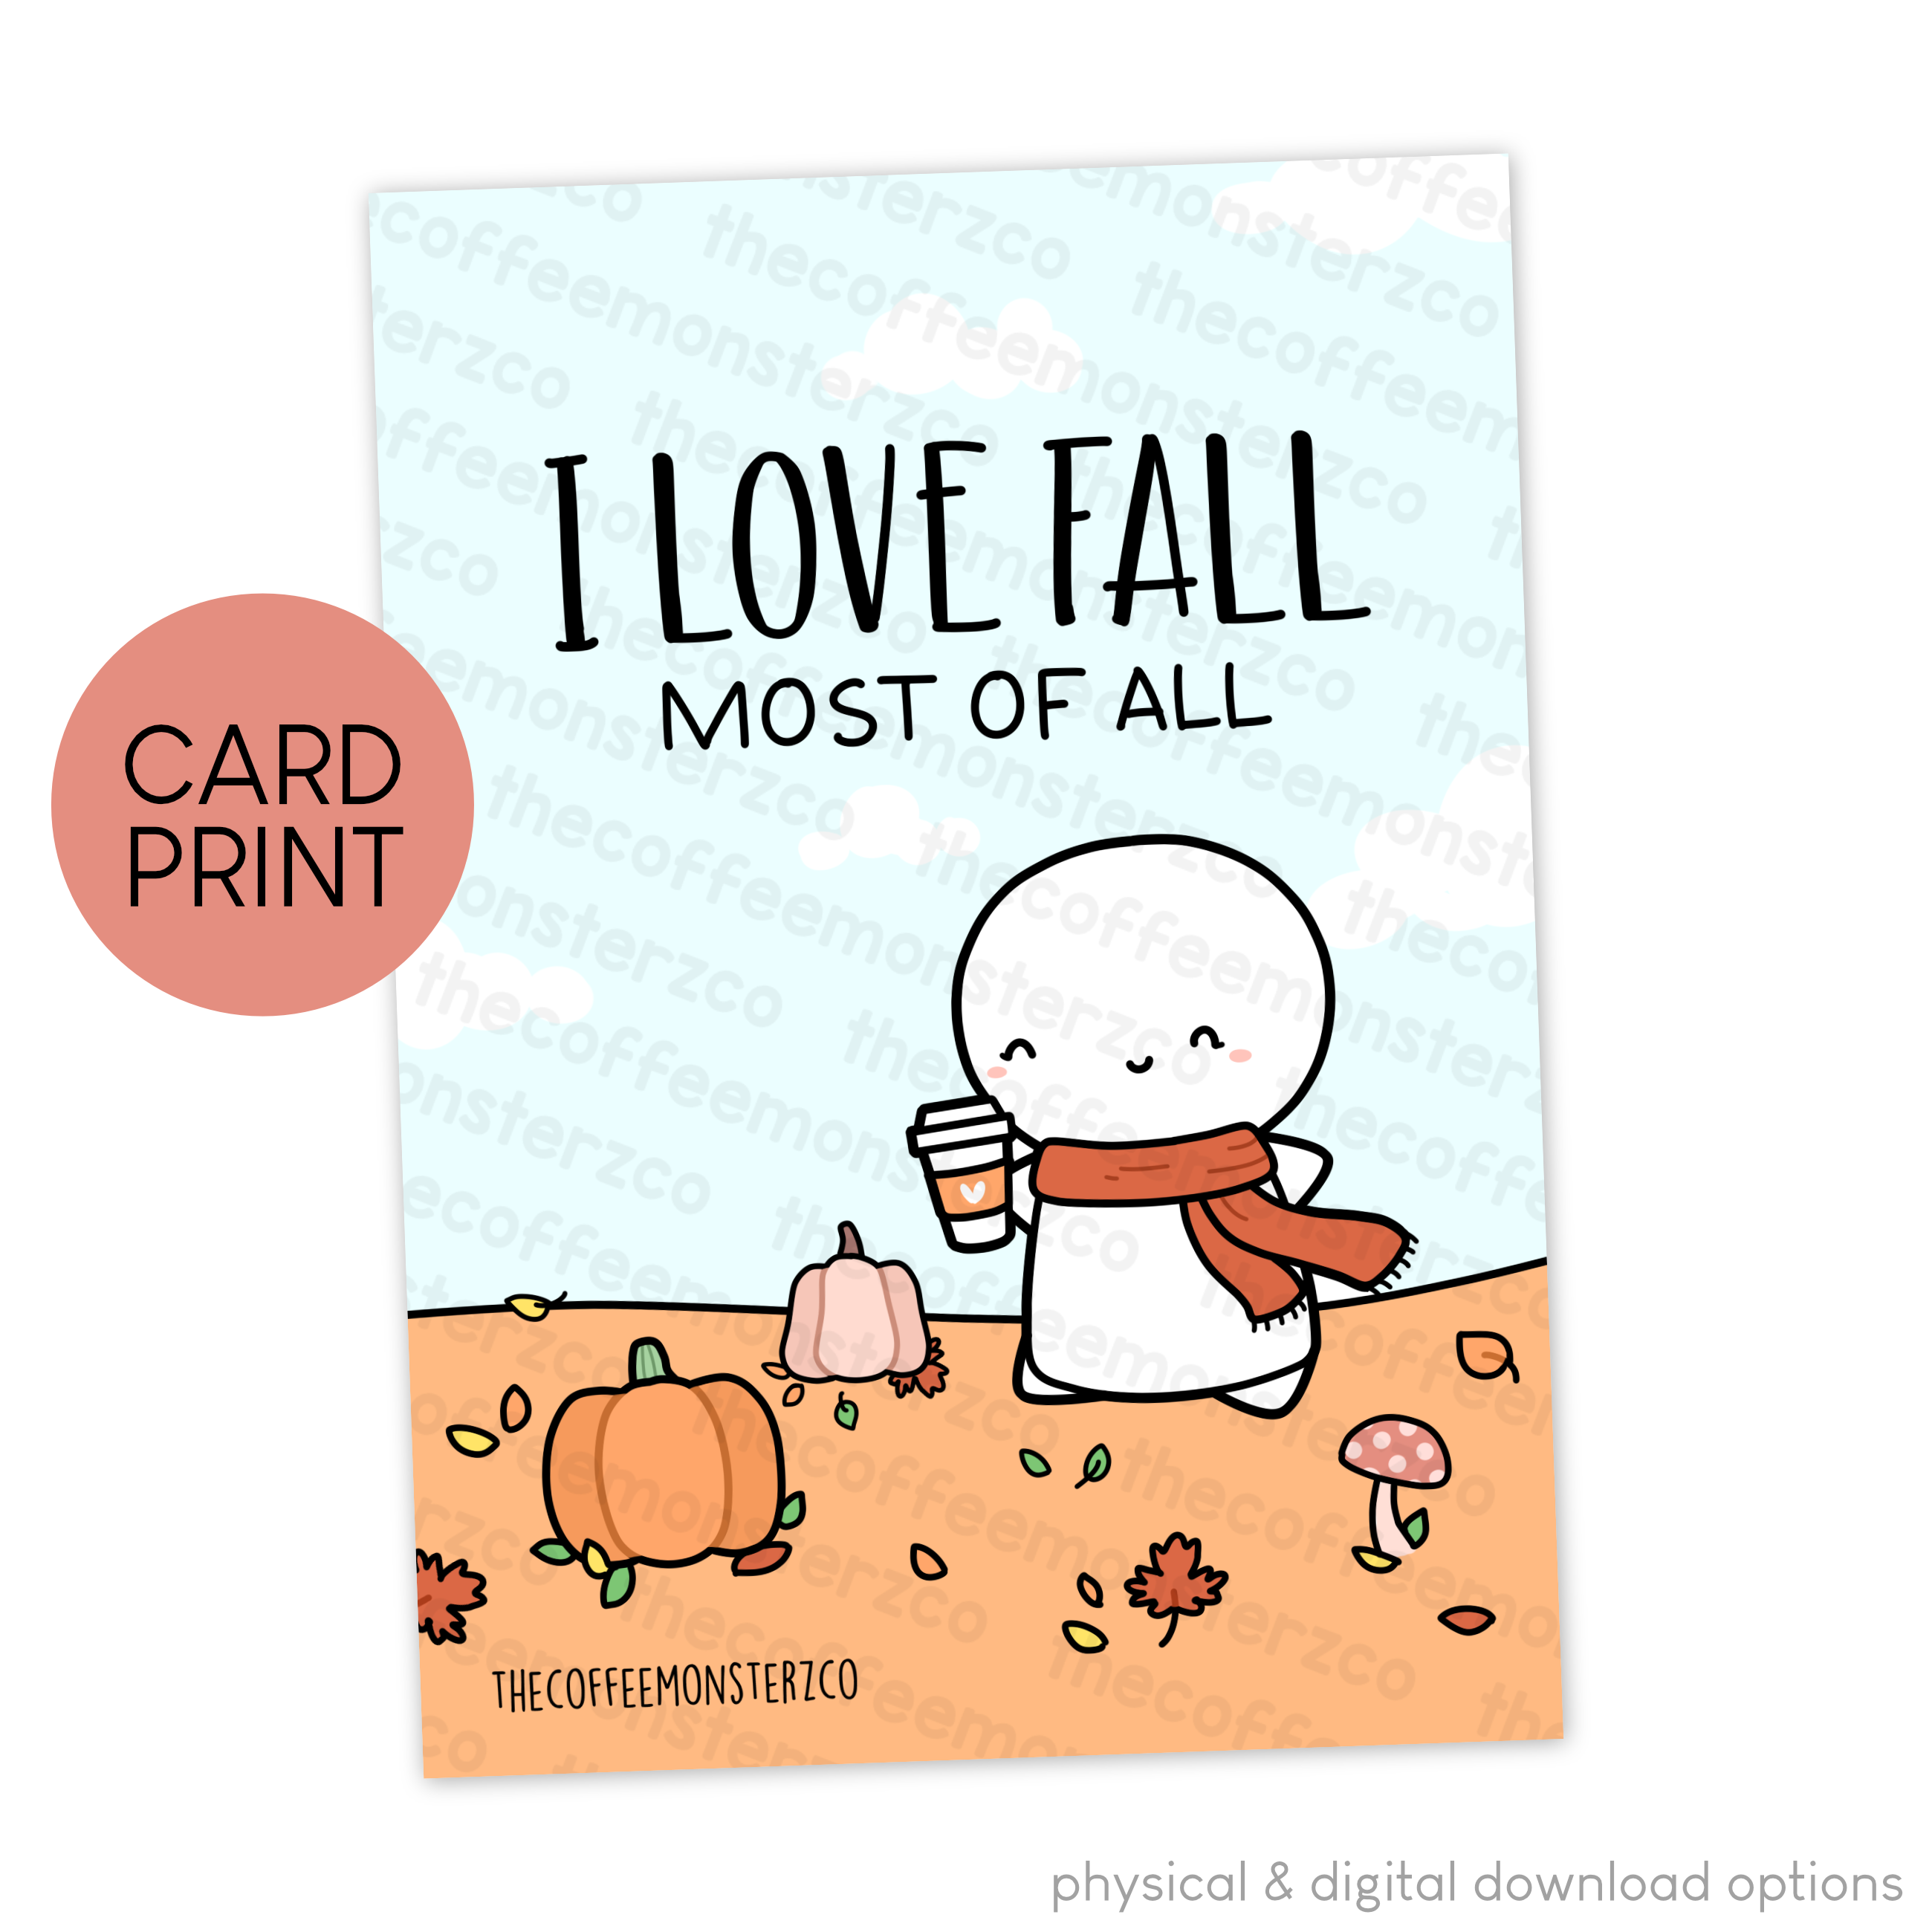 I Love Fall Most of All - Card Print